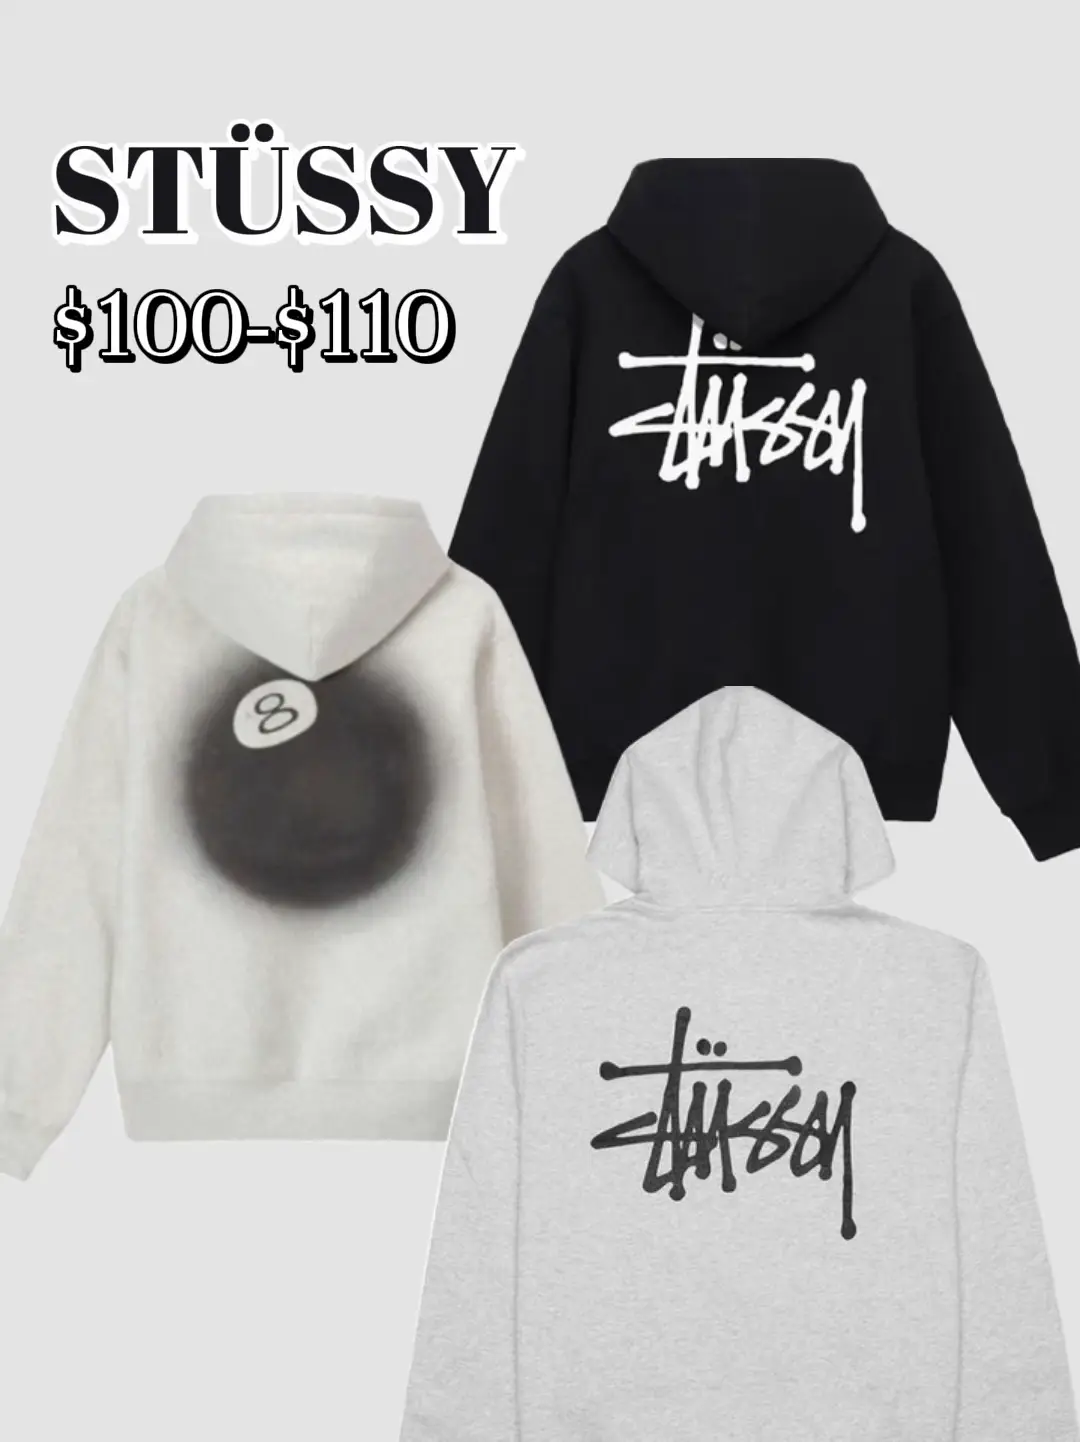 Not Stussy Hoodie – The Dude's Threads